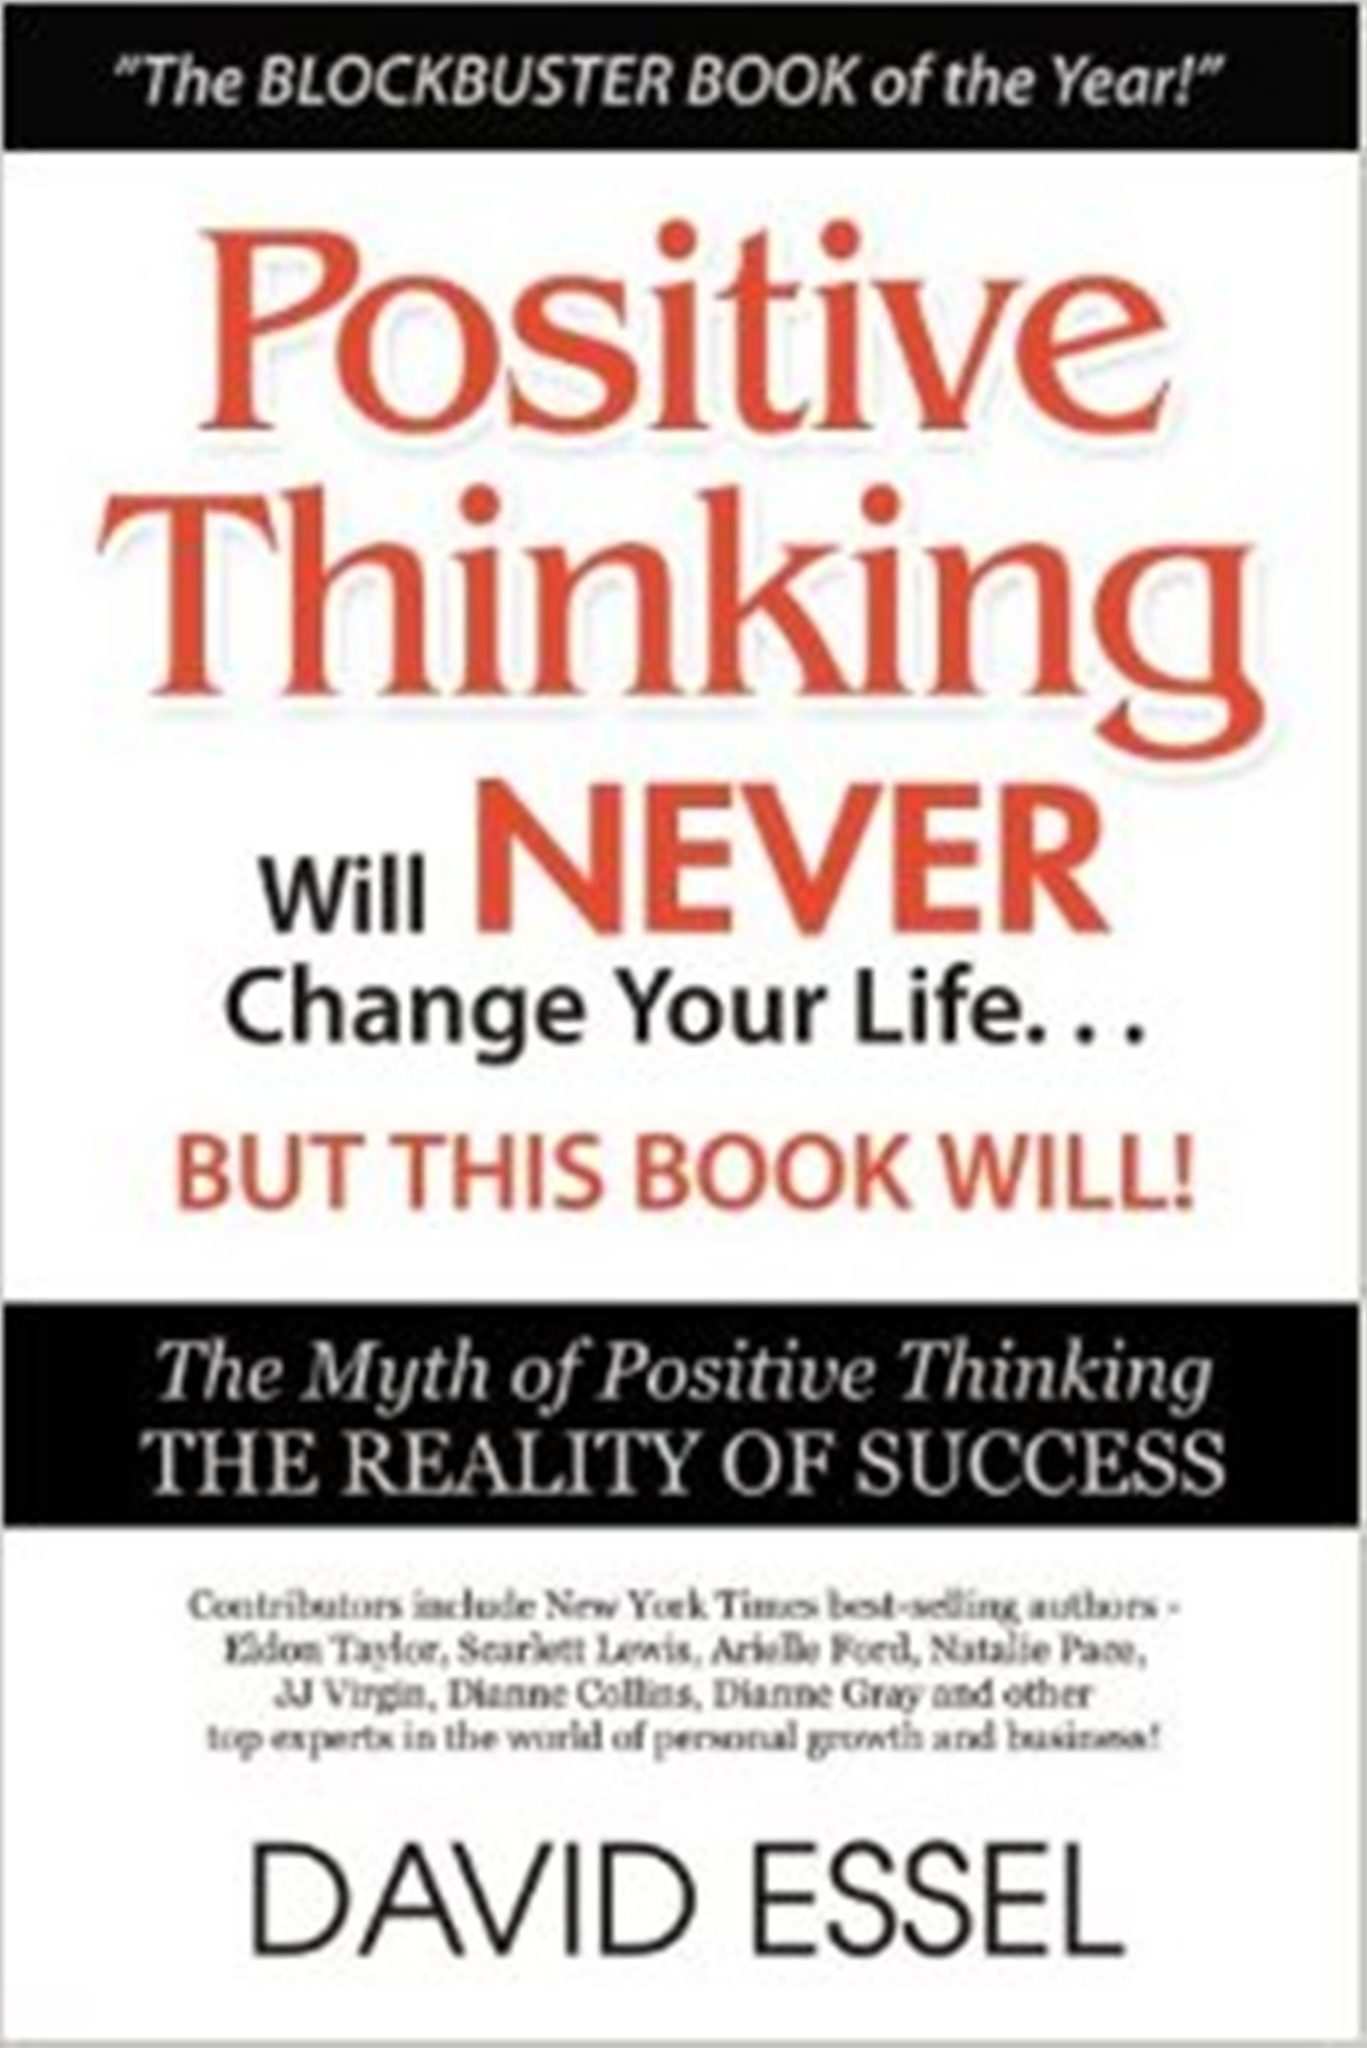 FREE: Positive Thinking Will Never Change Your Life But This Book Will: The Myth of Positive Thinking, The Reality of Success by David Essel